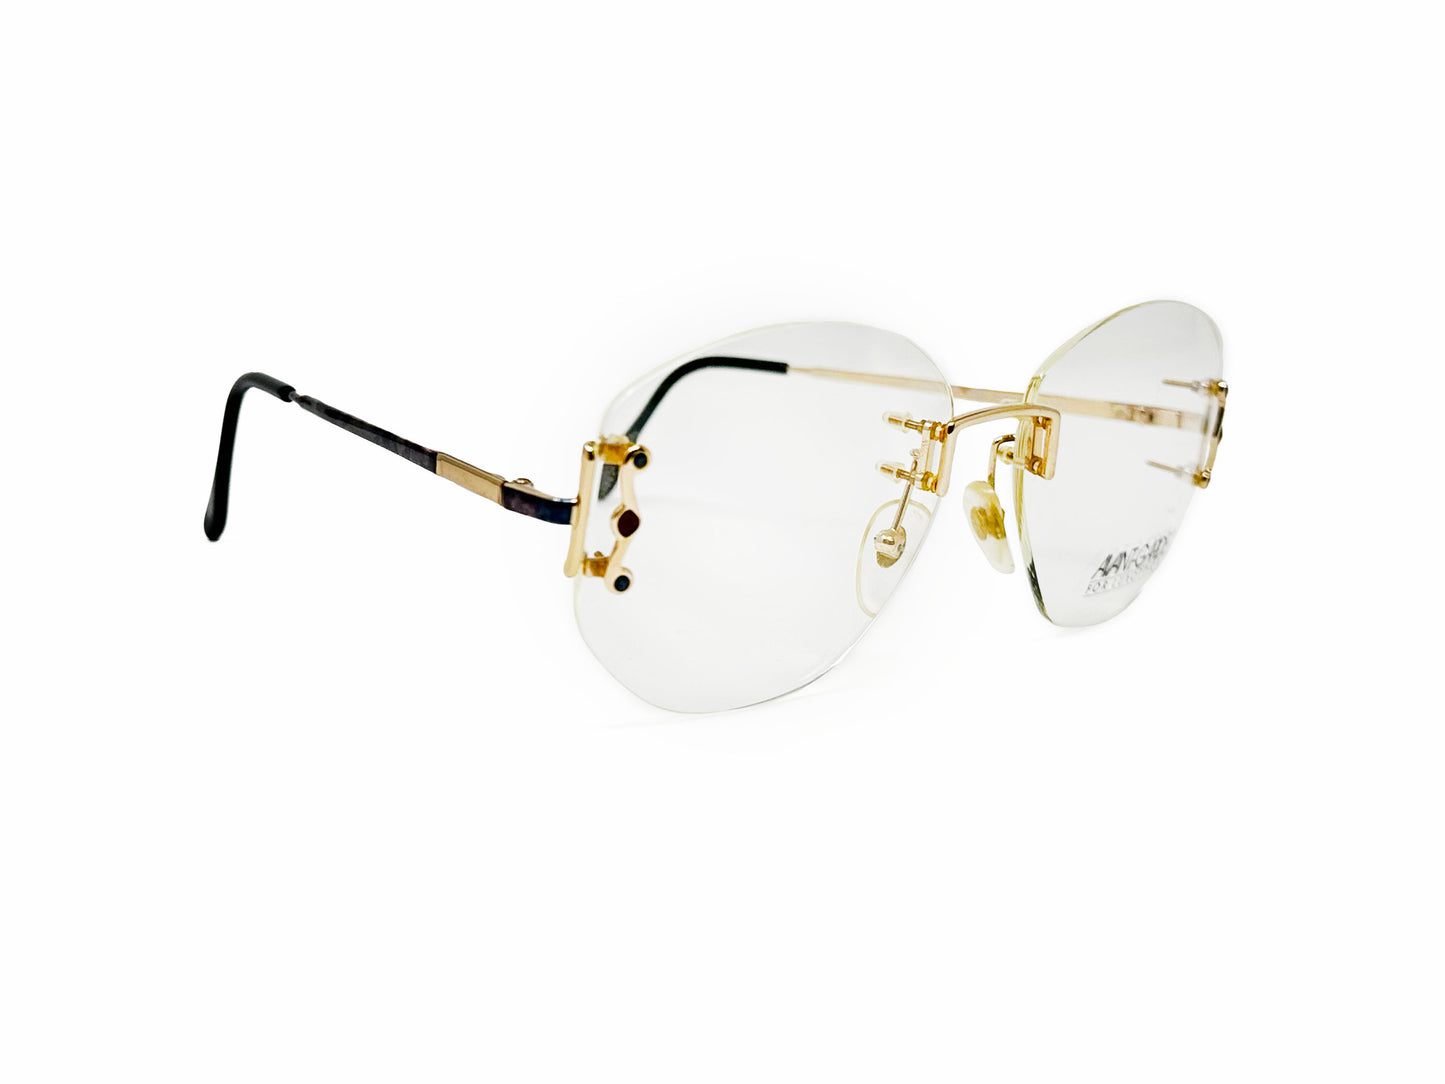 Avant-Garde Luxottica rimless optical frame with gold arms. Model: 7570. Color: G417. Side view.